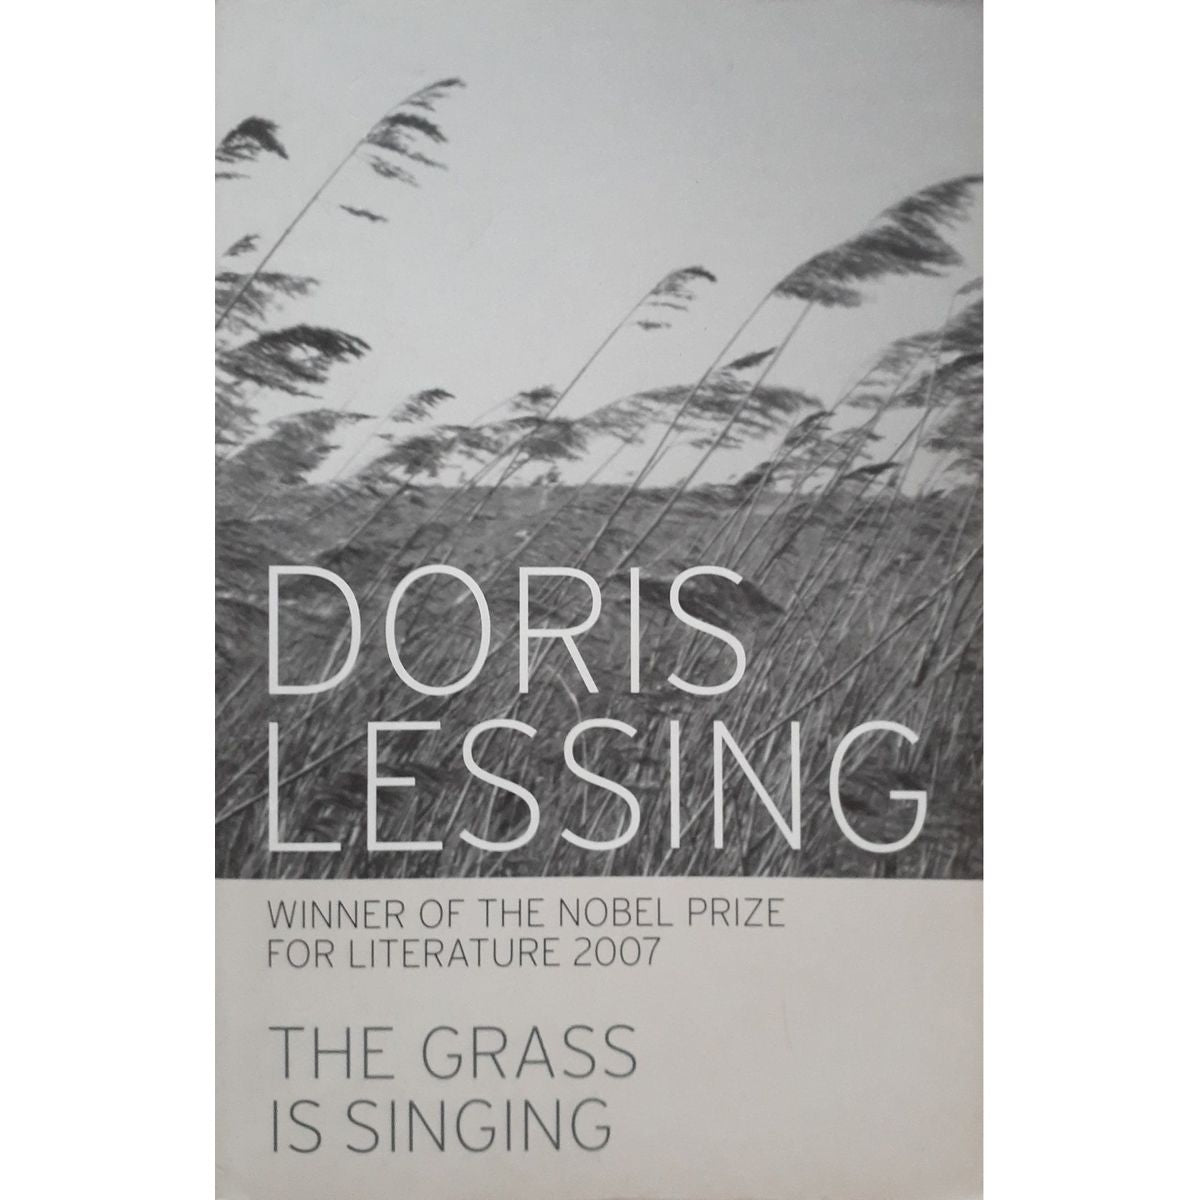 ISBN: 9780586089248 / 0586089241 - The Grass Is Singing by Doris Lessing [2007]